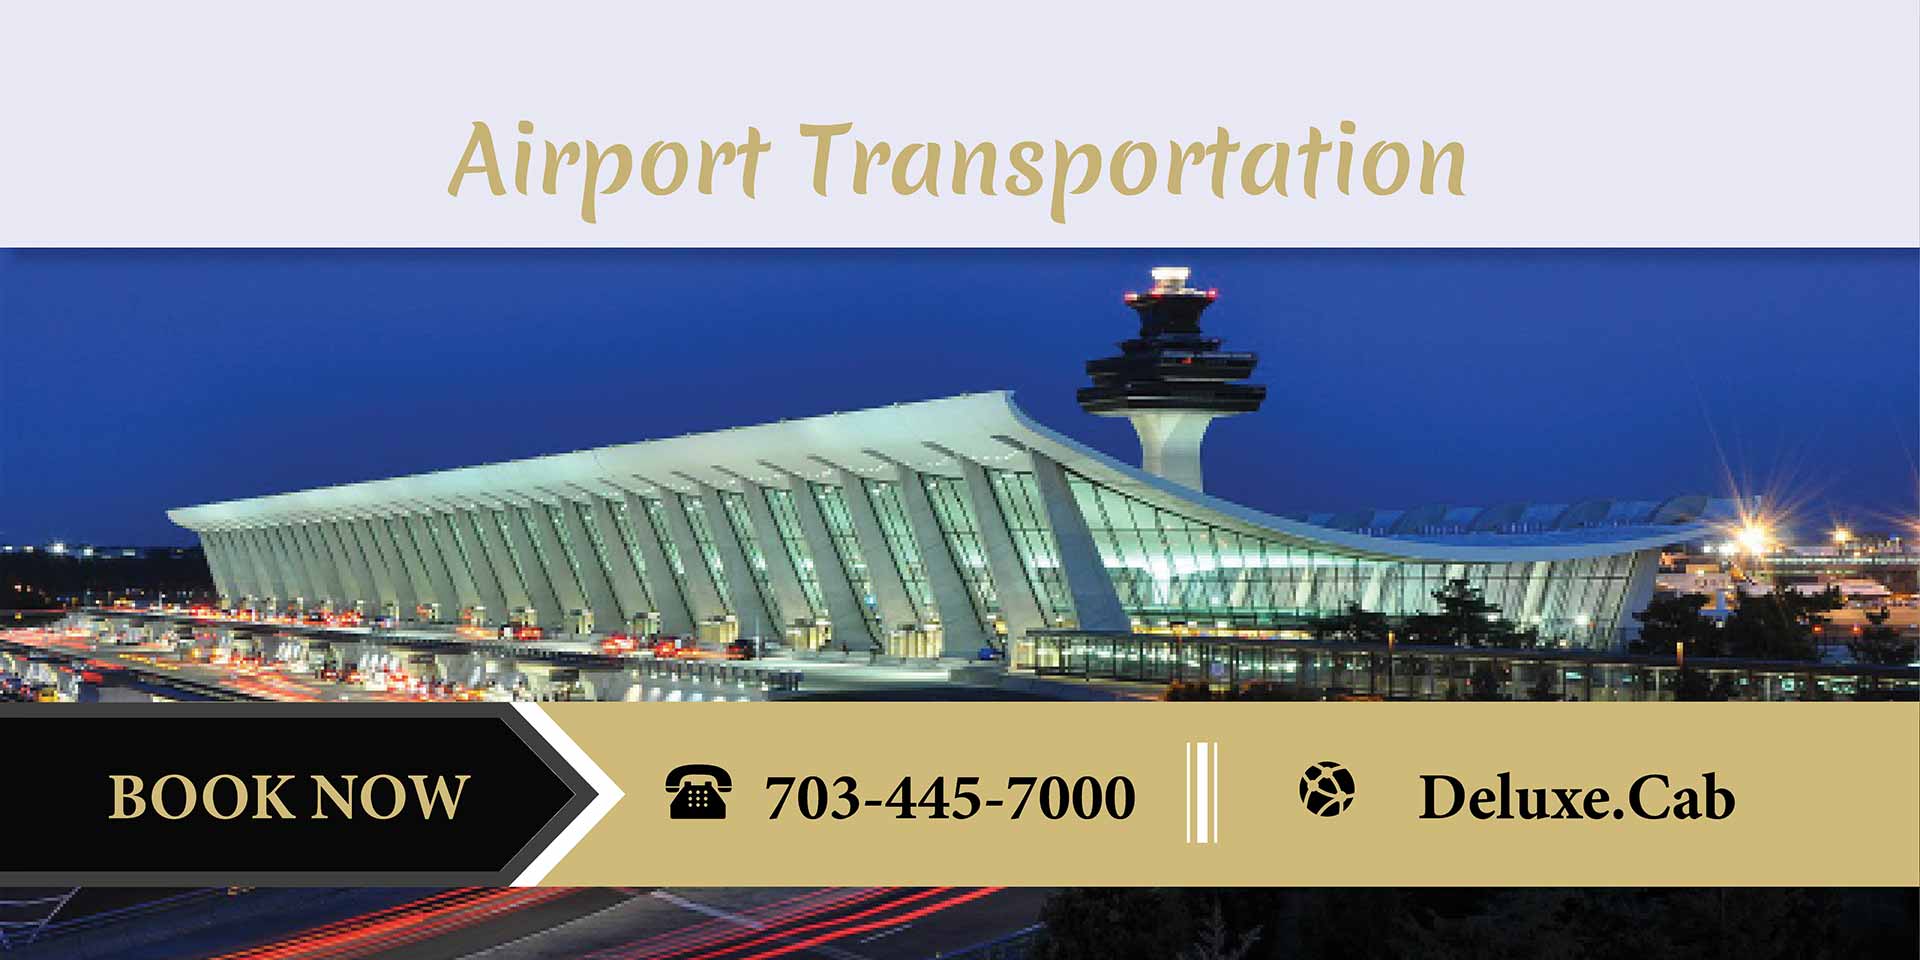 Deluxe Cab 7034457000 - Airport Transportation